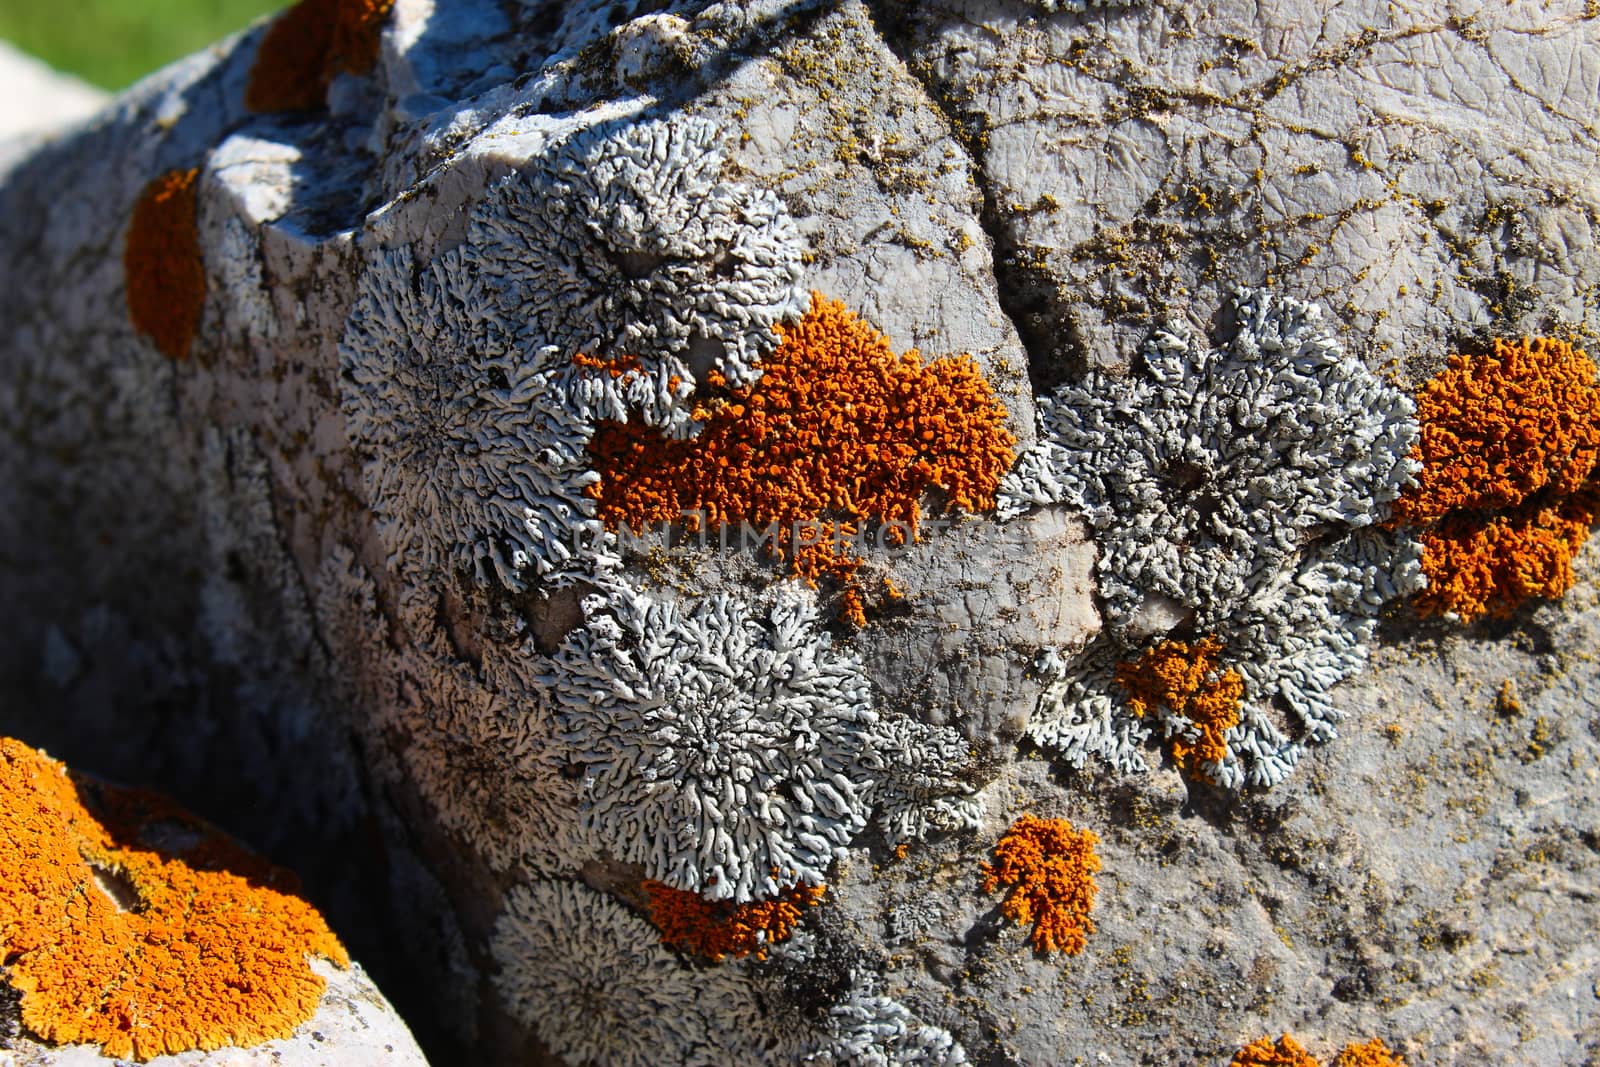 Orange and white spots (lichens) on a rock in the mountains. Mountain Bjelasnica, Bosnia and Herzegovina.